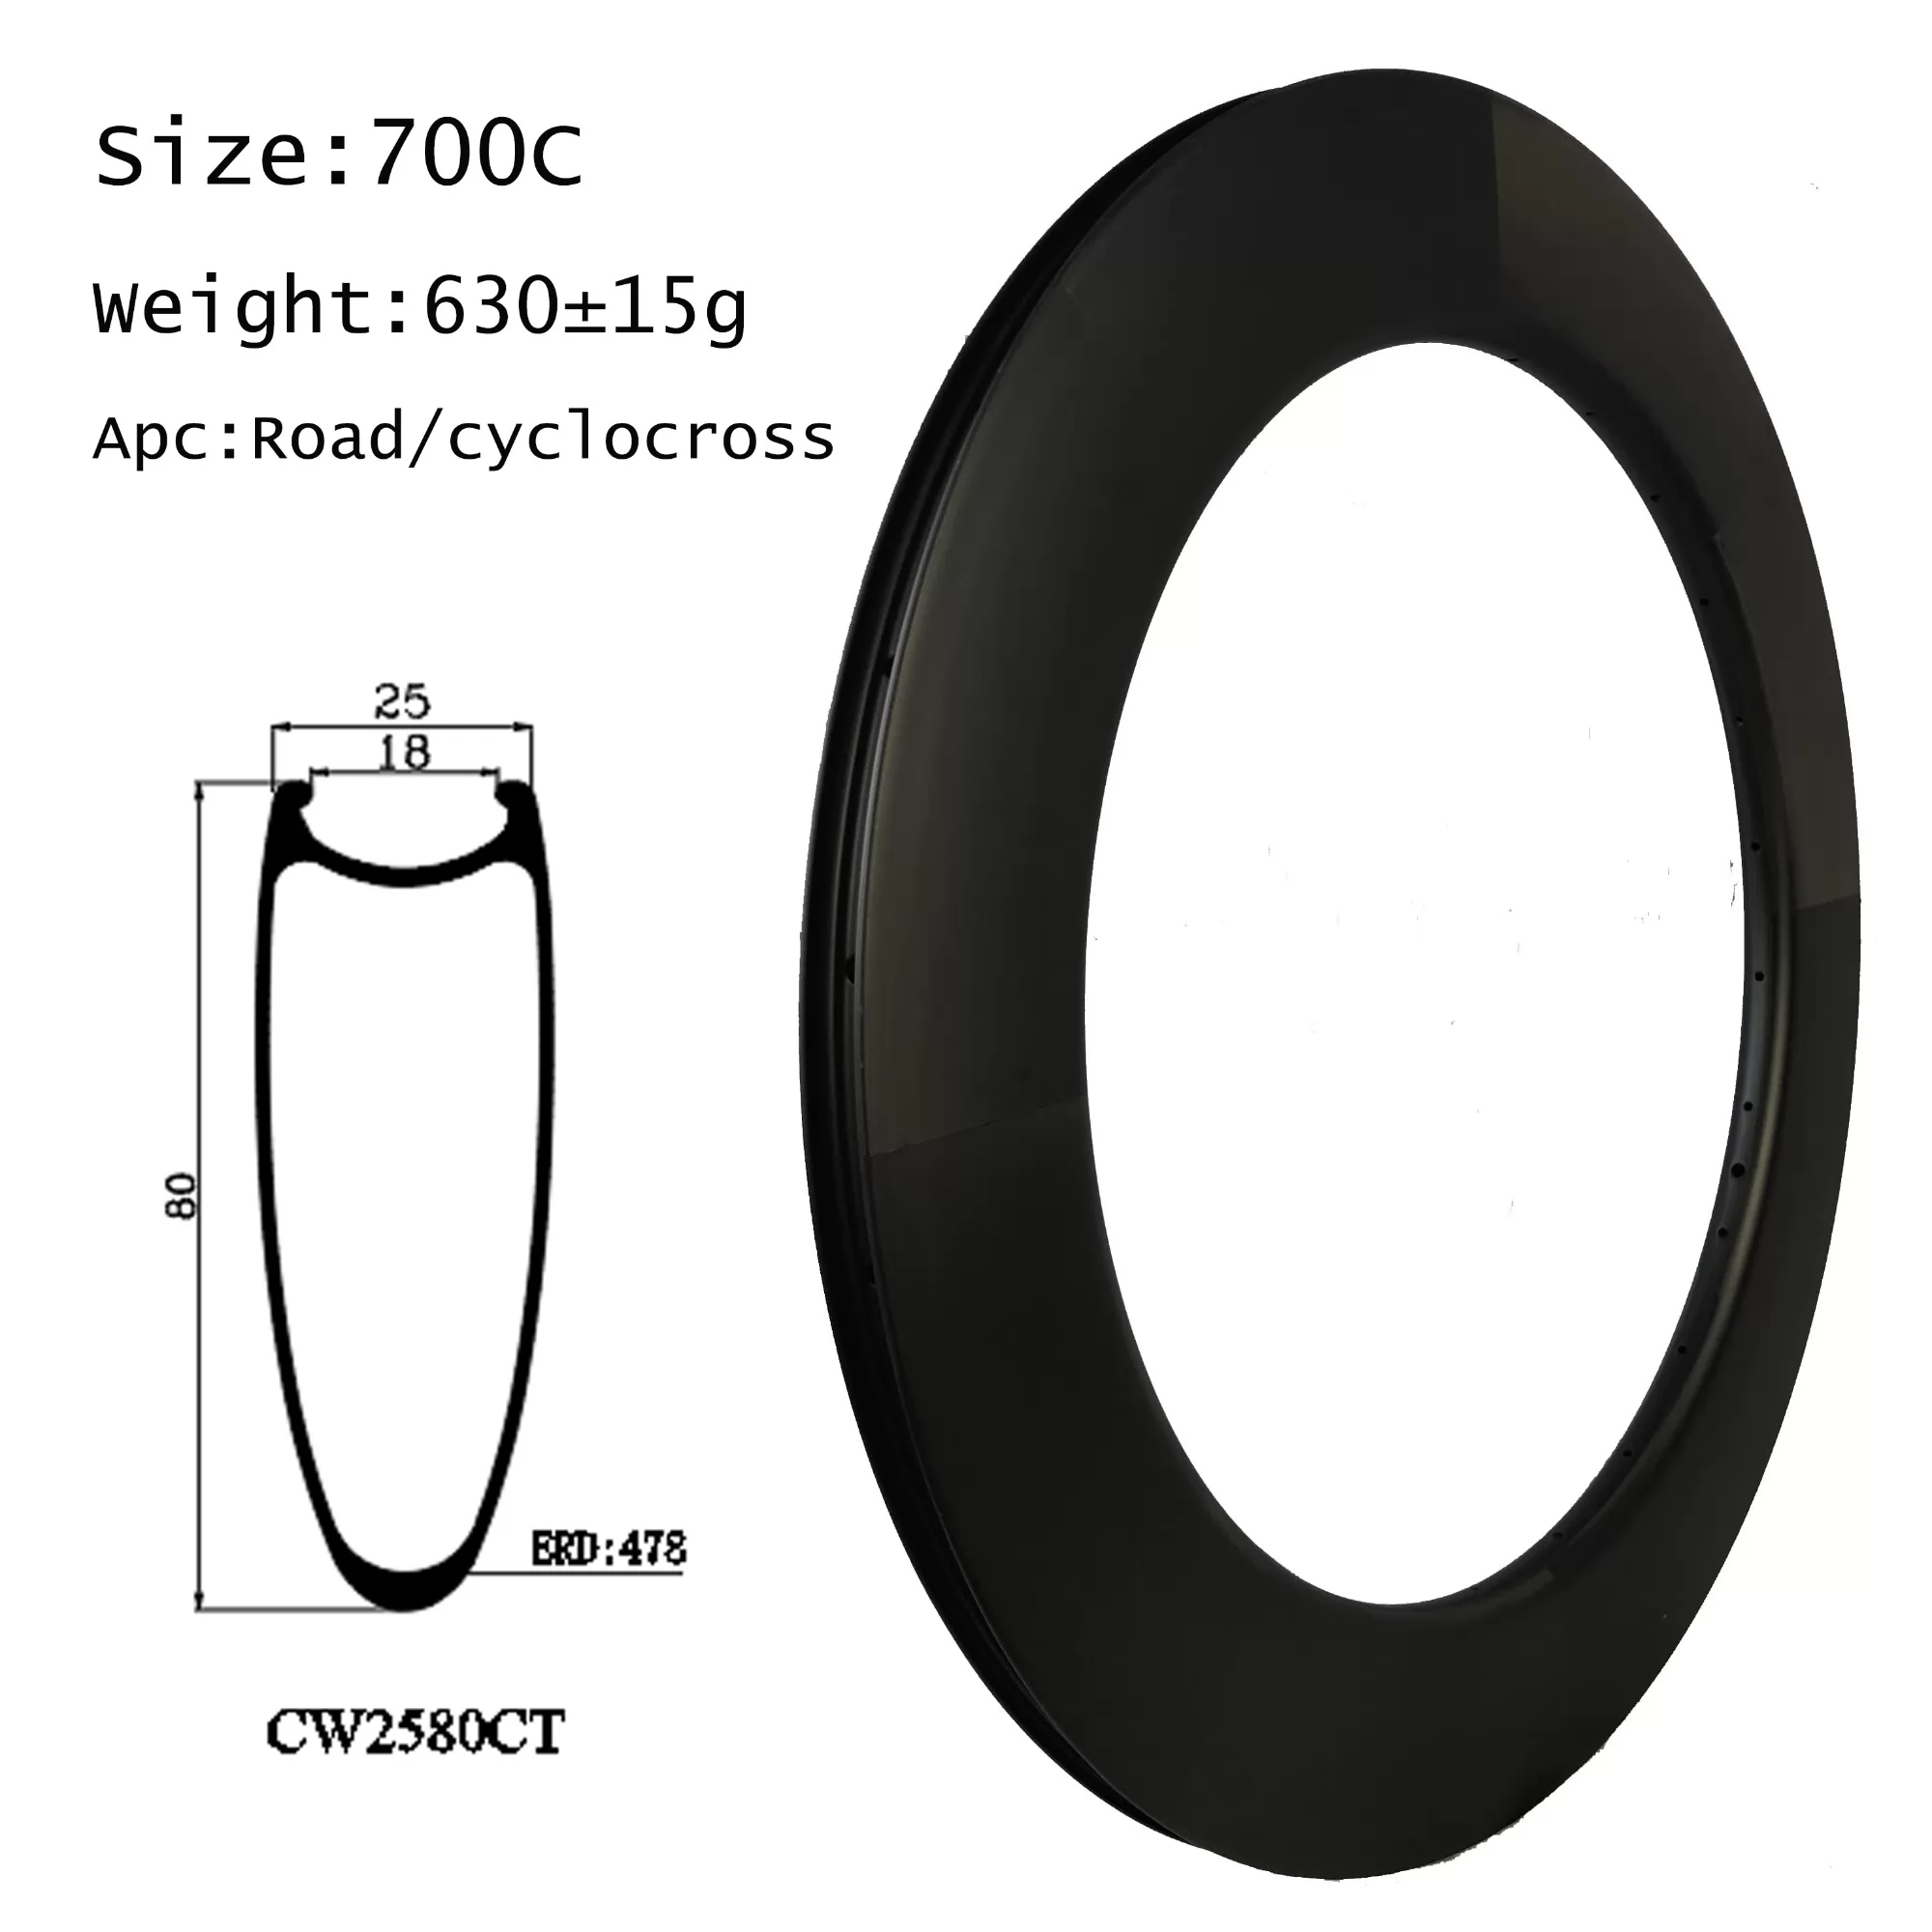 |CW25-80C/T/CT| Carbon bike rims 80mm depth 25mm width clincher/tubular/tubeless compatible for road/track bike cyclocross cycling composite material